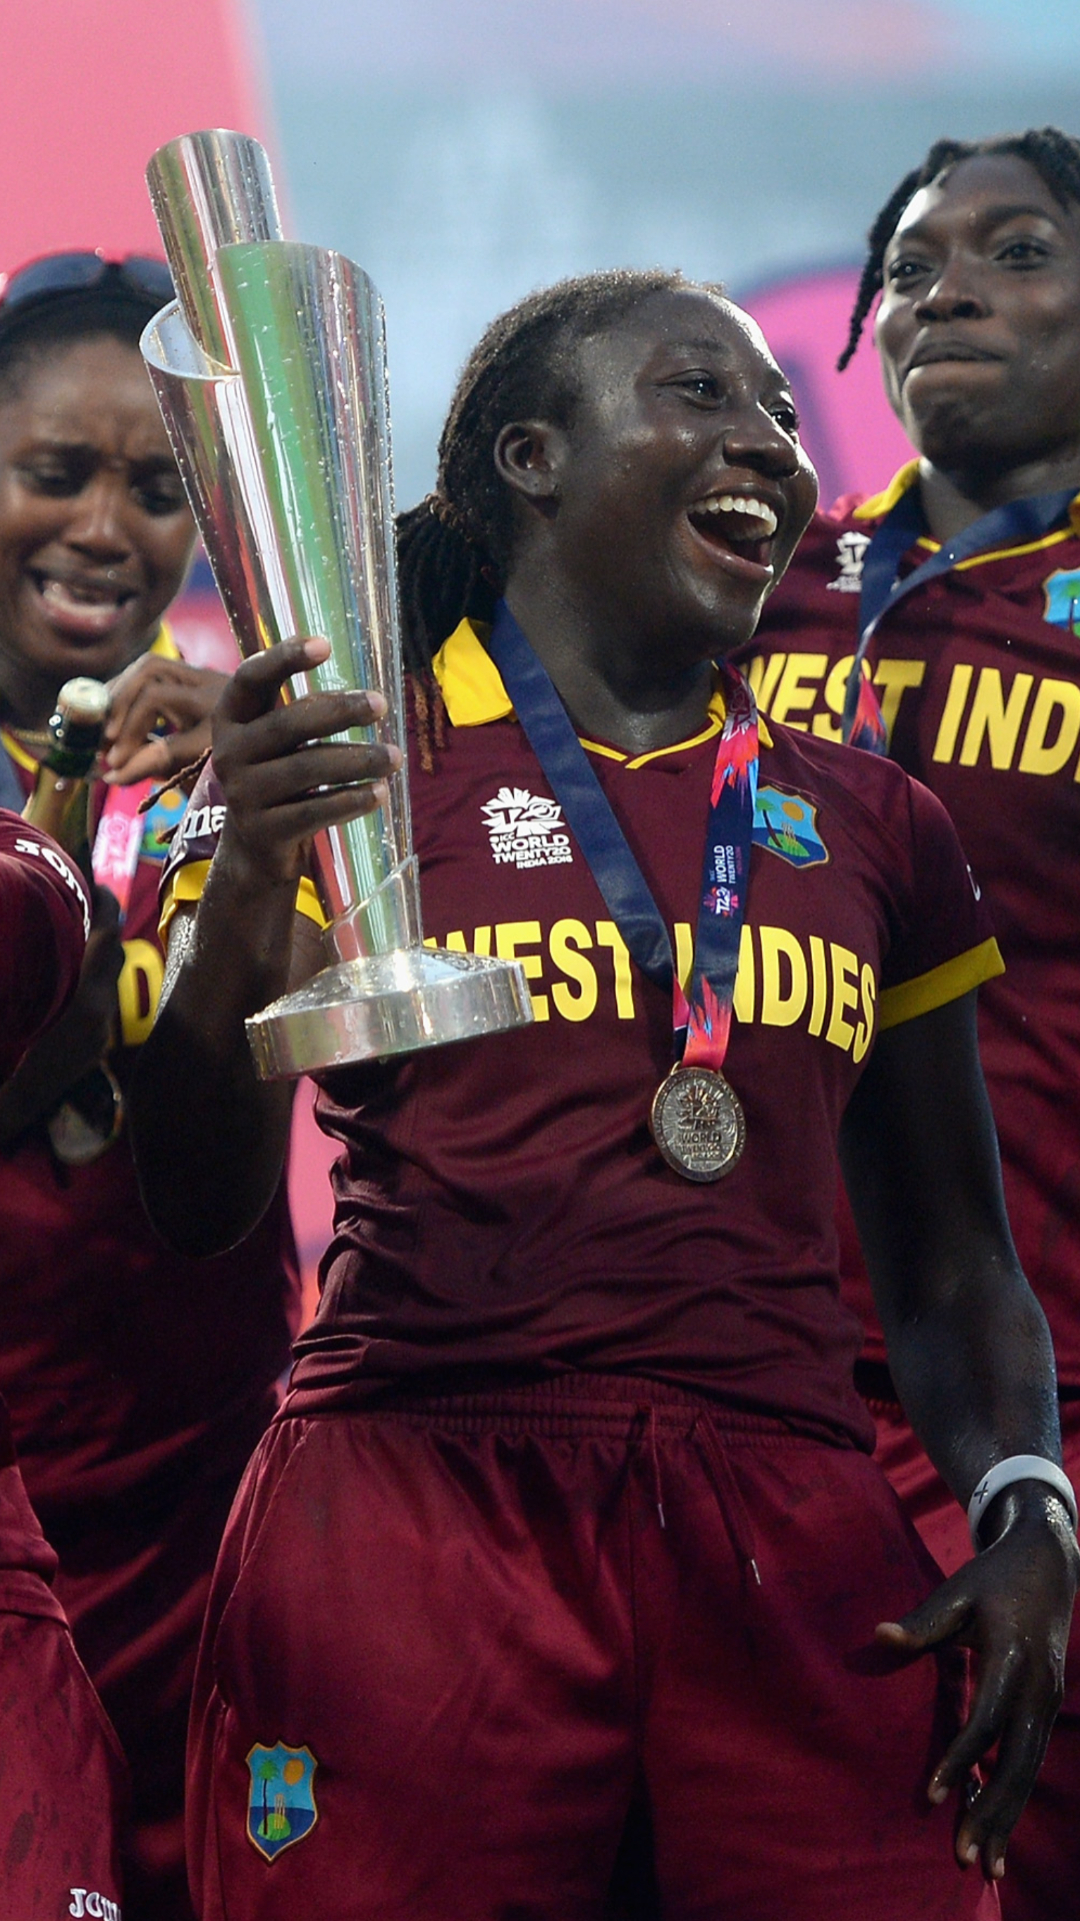 From 2009 to 2023, list of winners of all editions of women's T20 World Cup